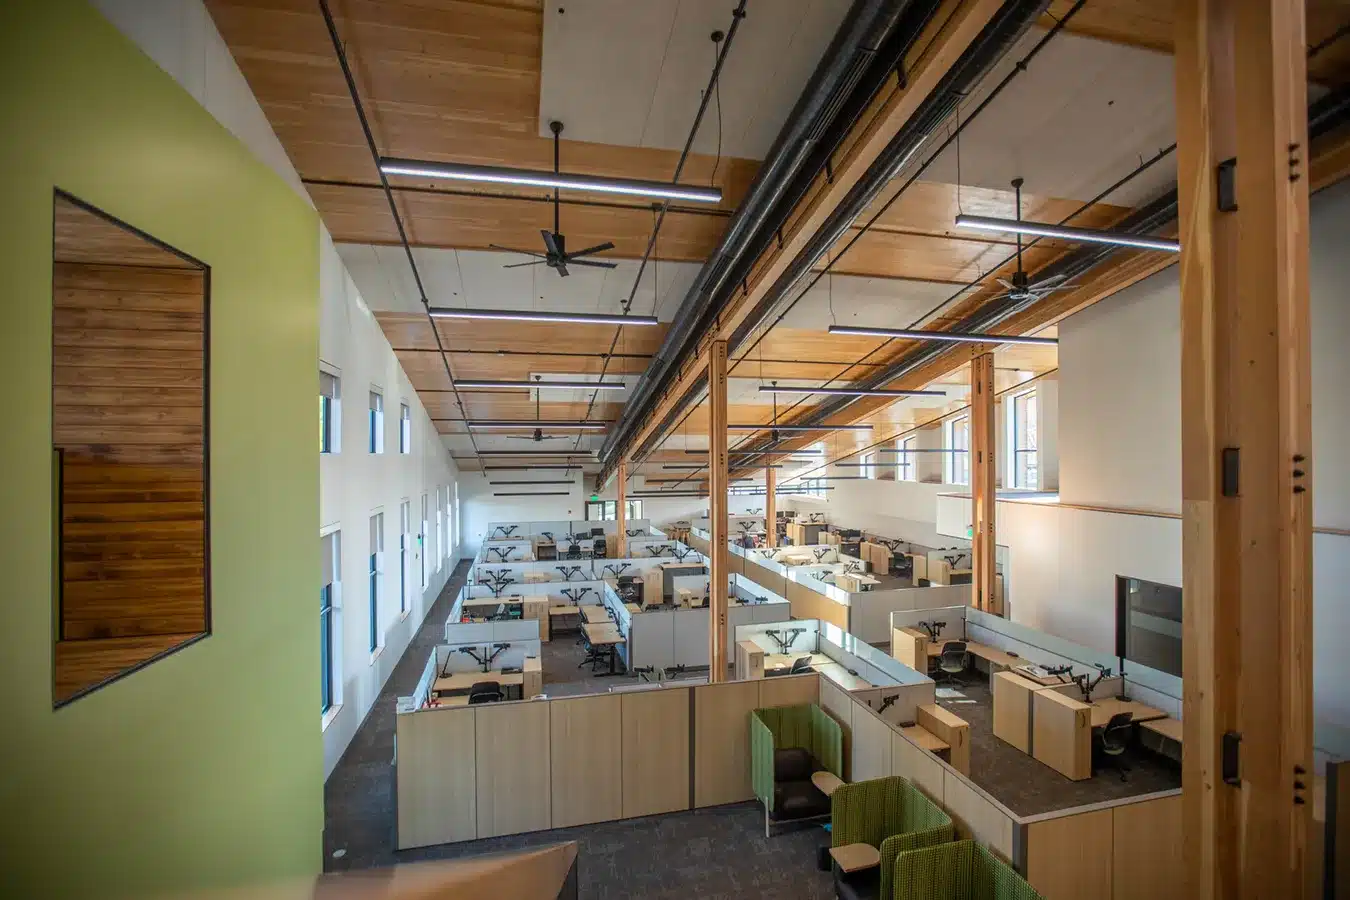 QB Corporation's Ridge, Rafter Glued laminated timber and Columns at USFS KAMIAH SUPERVISORS OFFICE